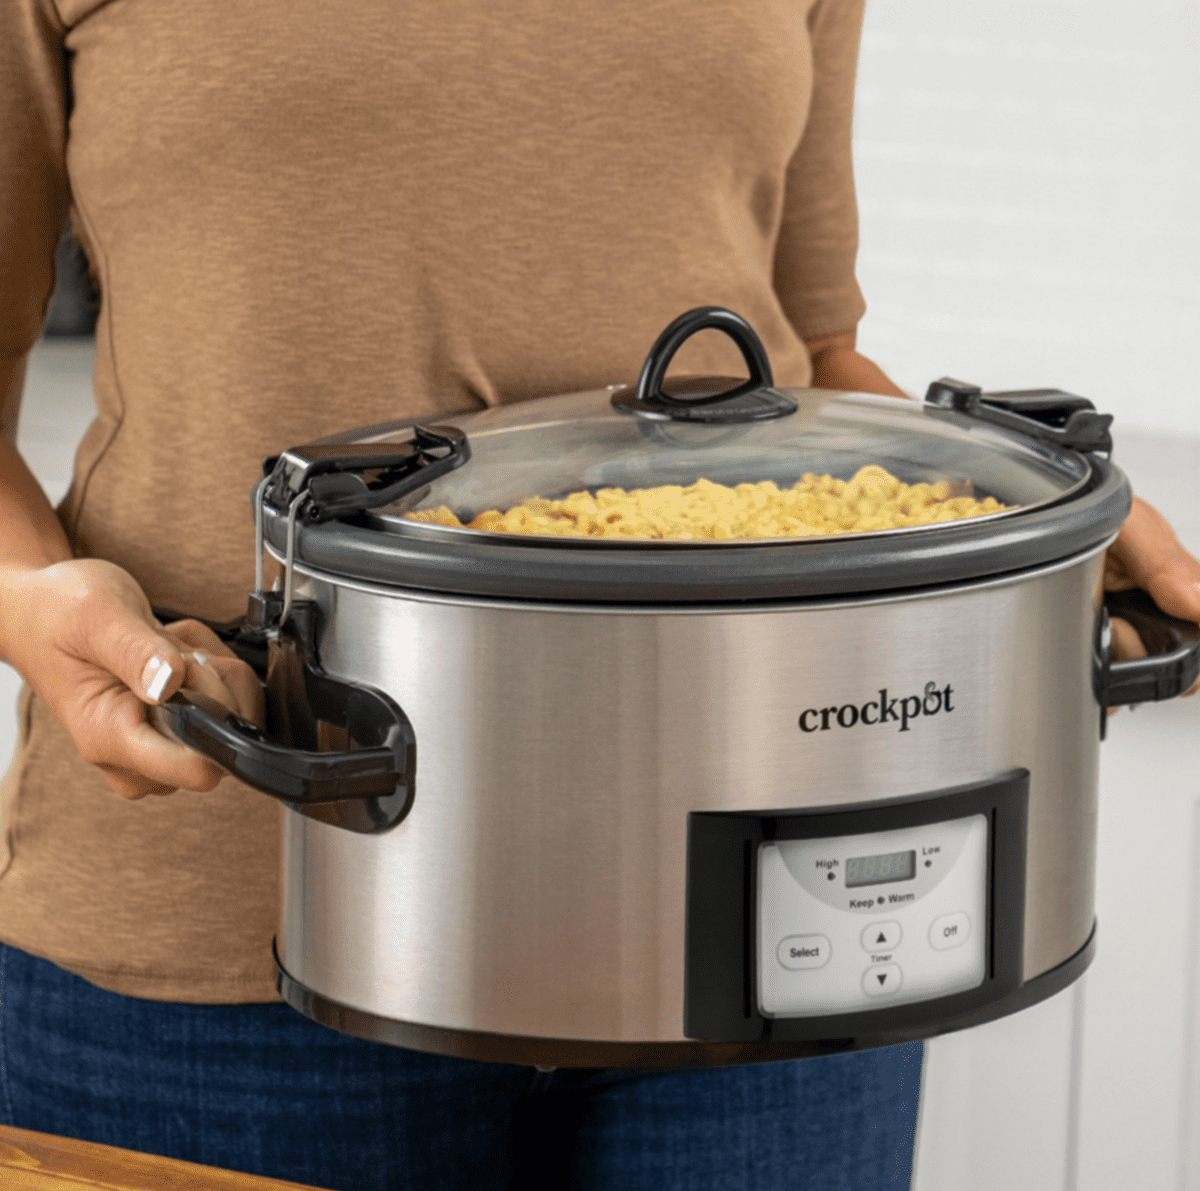 Crockpot Cook and Carry Slow Cooker